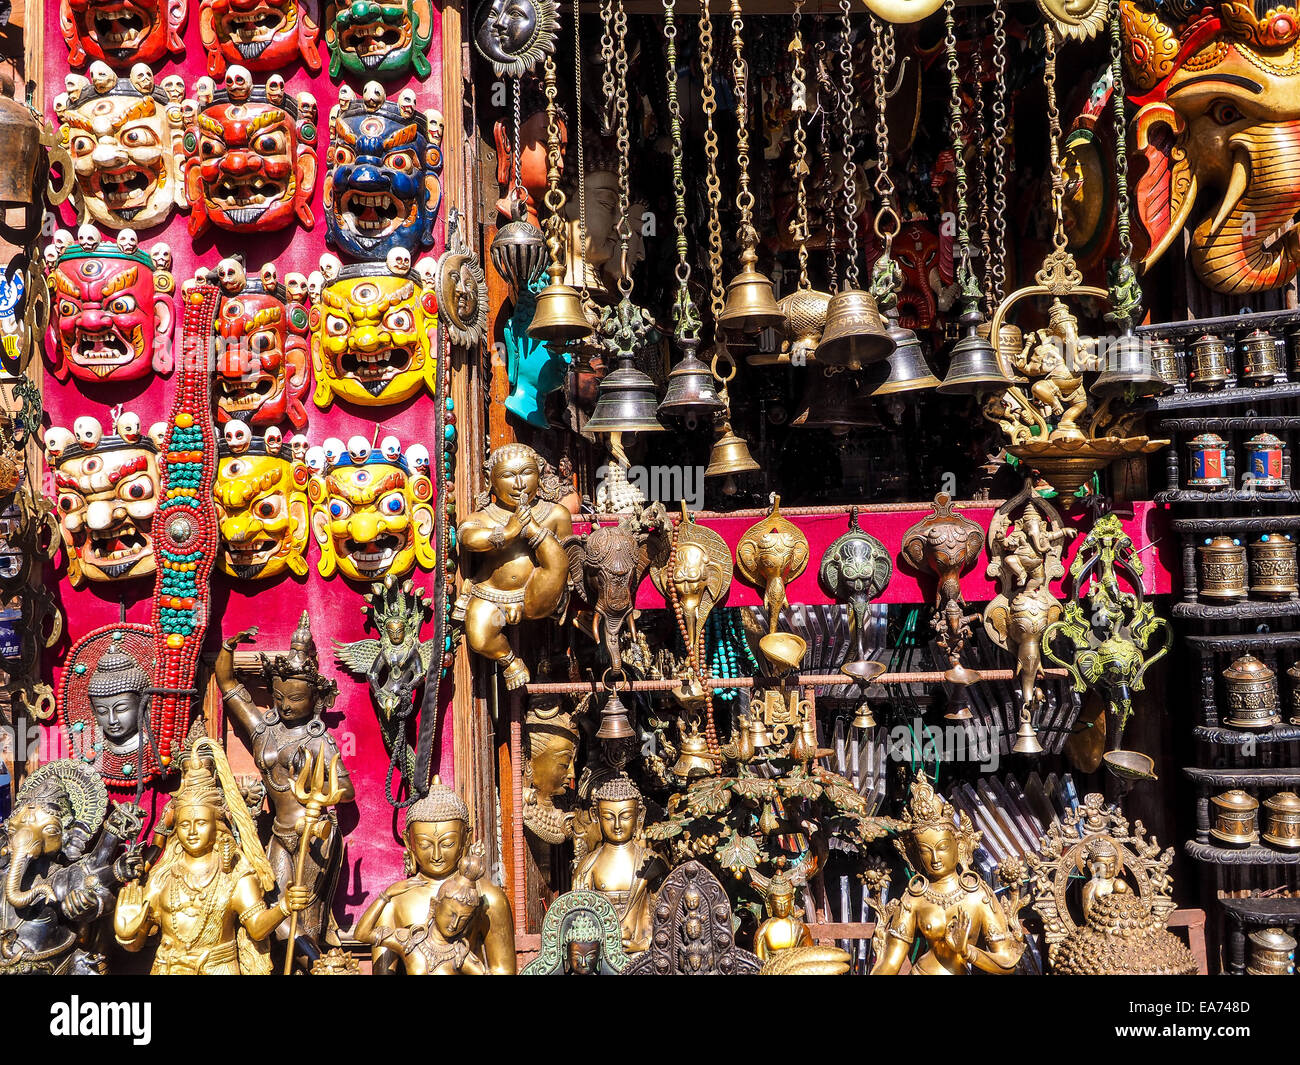 Masks, souvenirs in street shop at Durbar Square, Nov 29, 2013 in Kathmandu, Nepal. Preference for construction of royal palaces Stock Photo